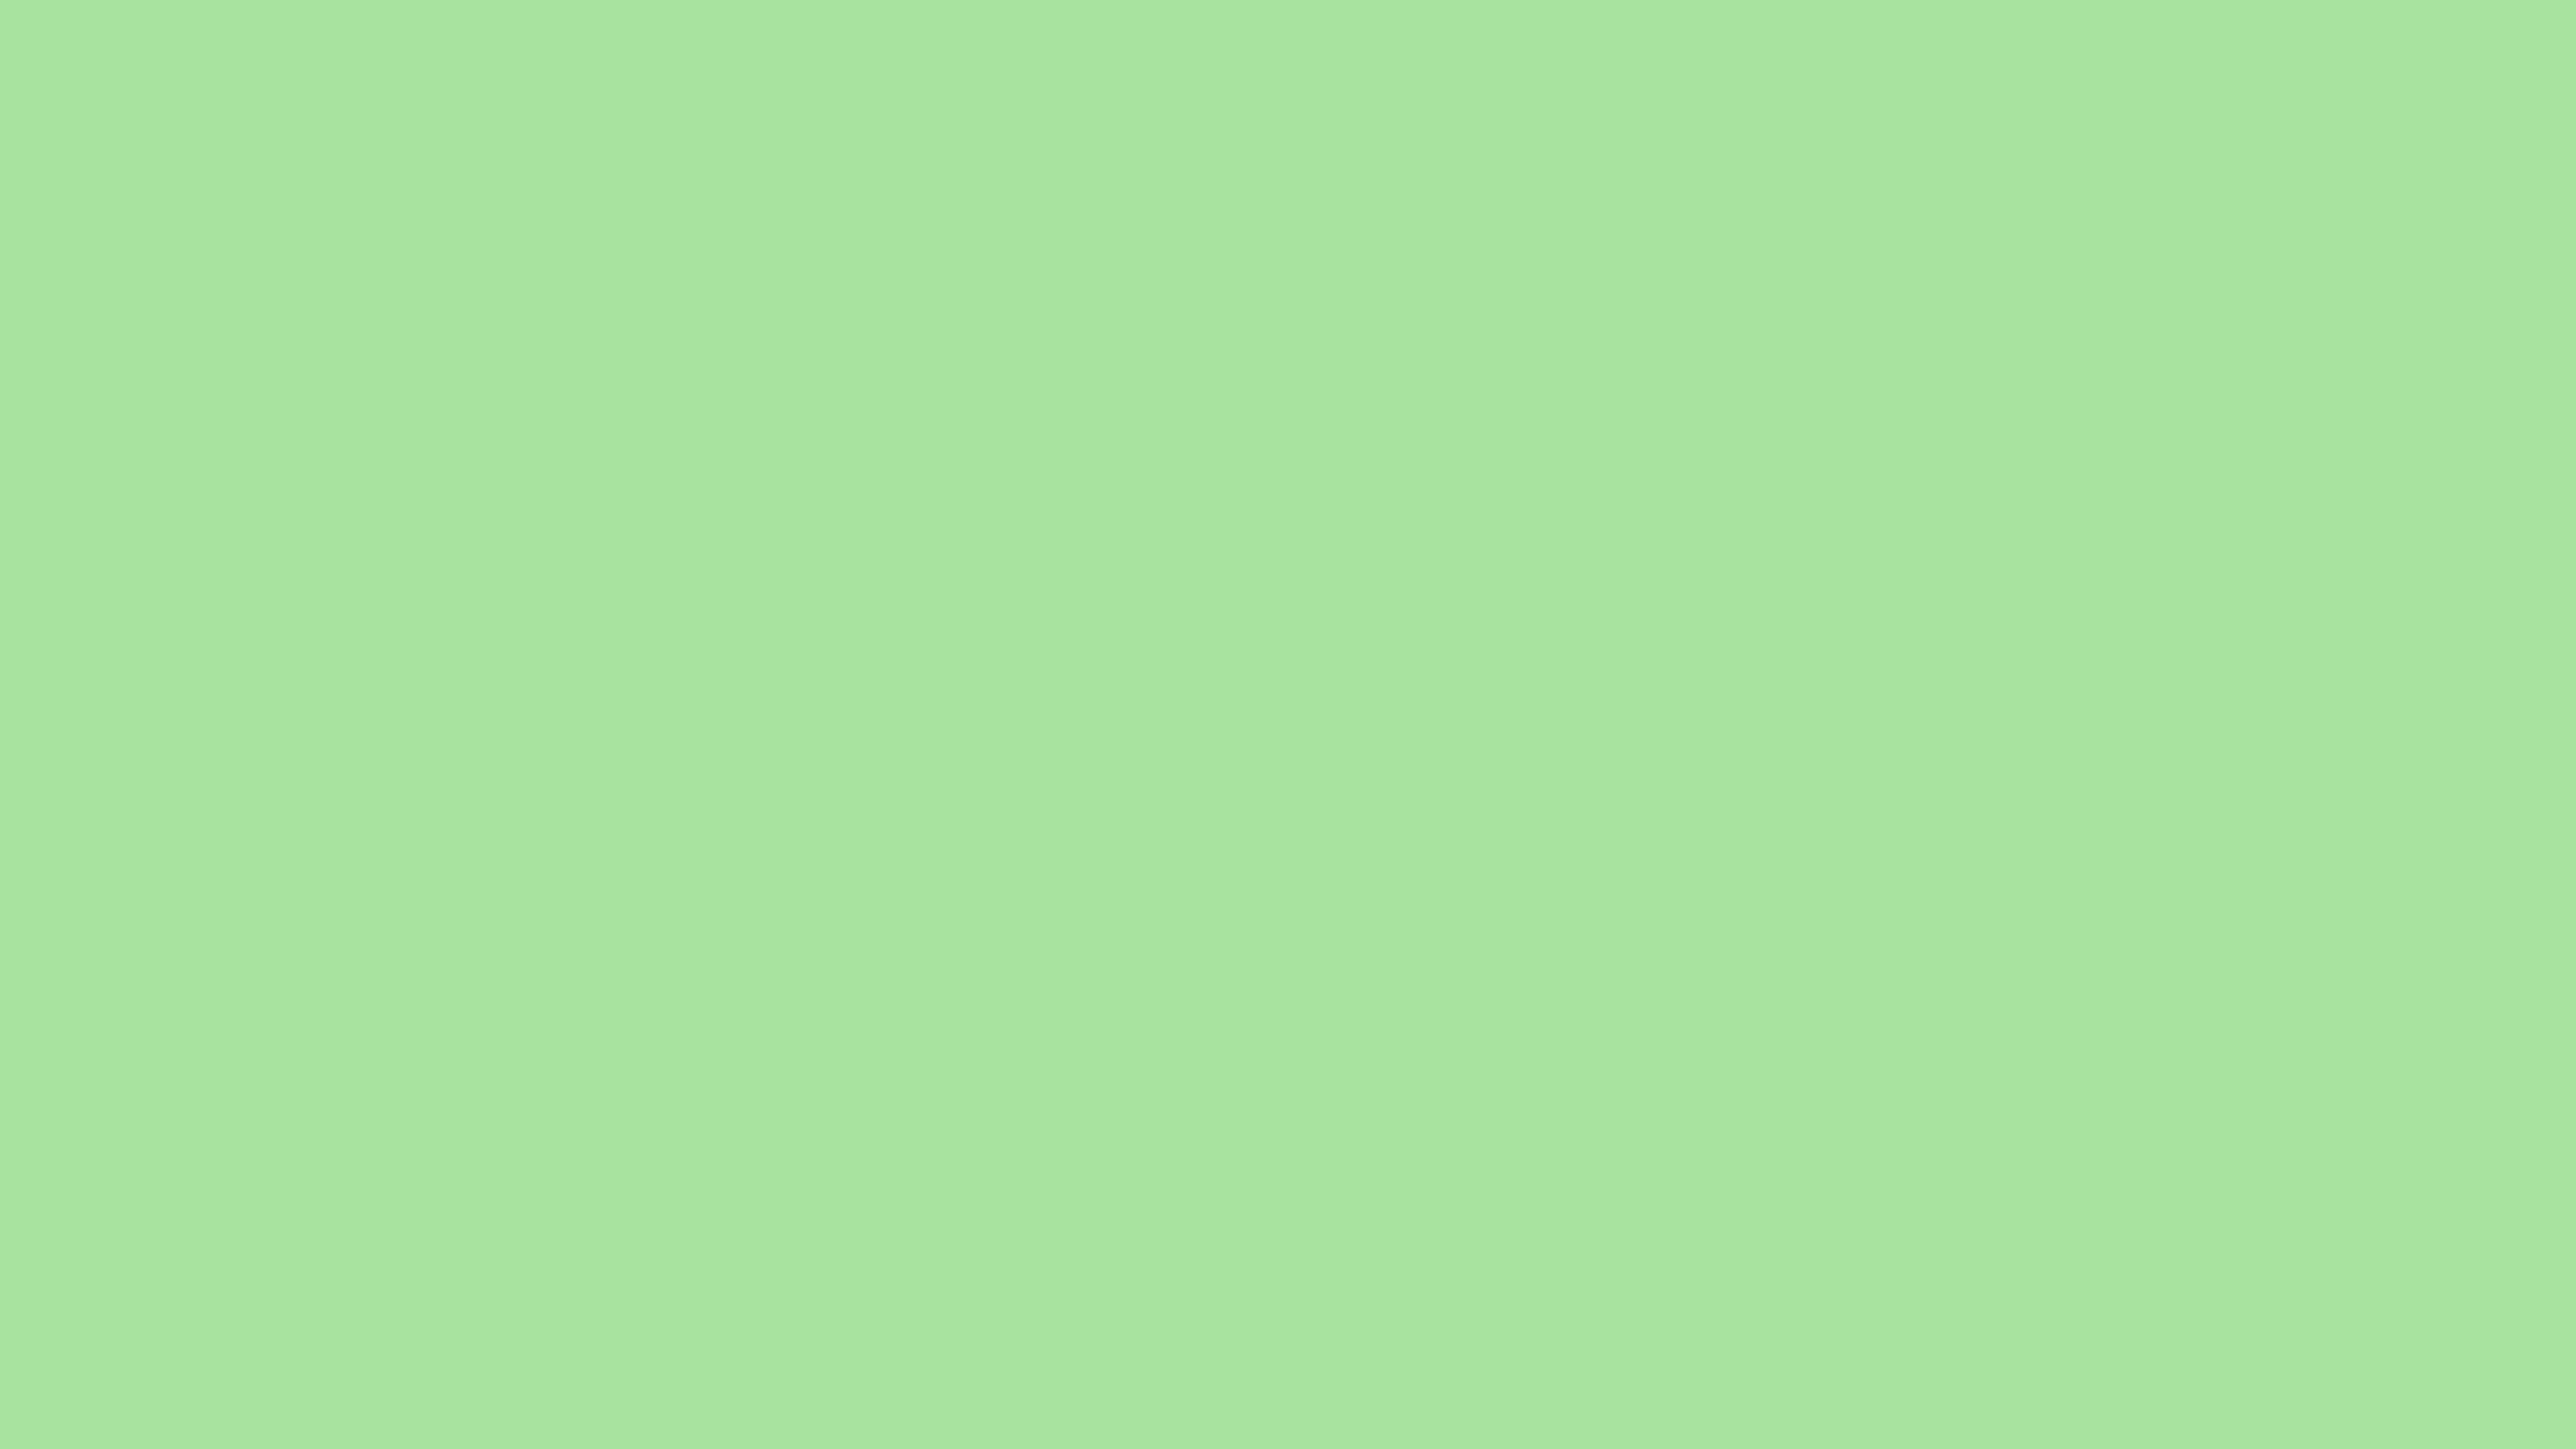 4096x2304 Granny Smith Apple Solid Color Background